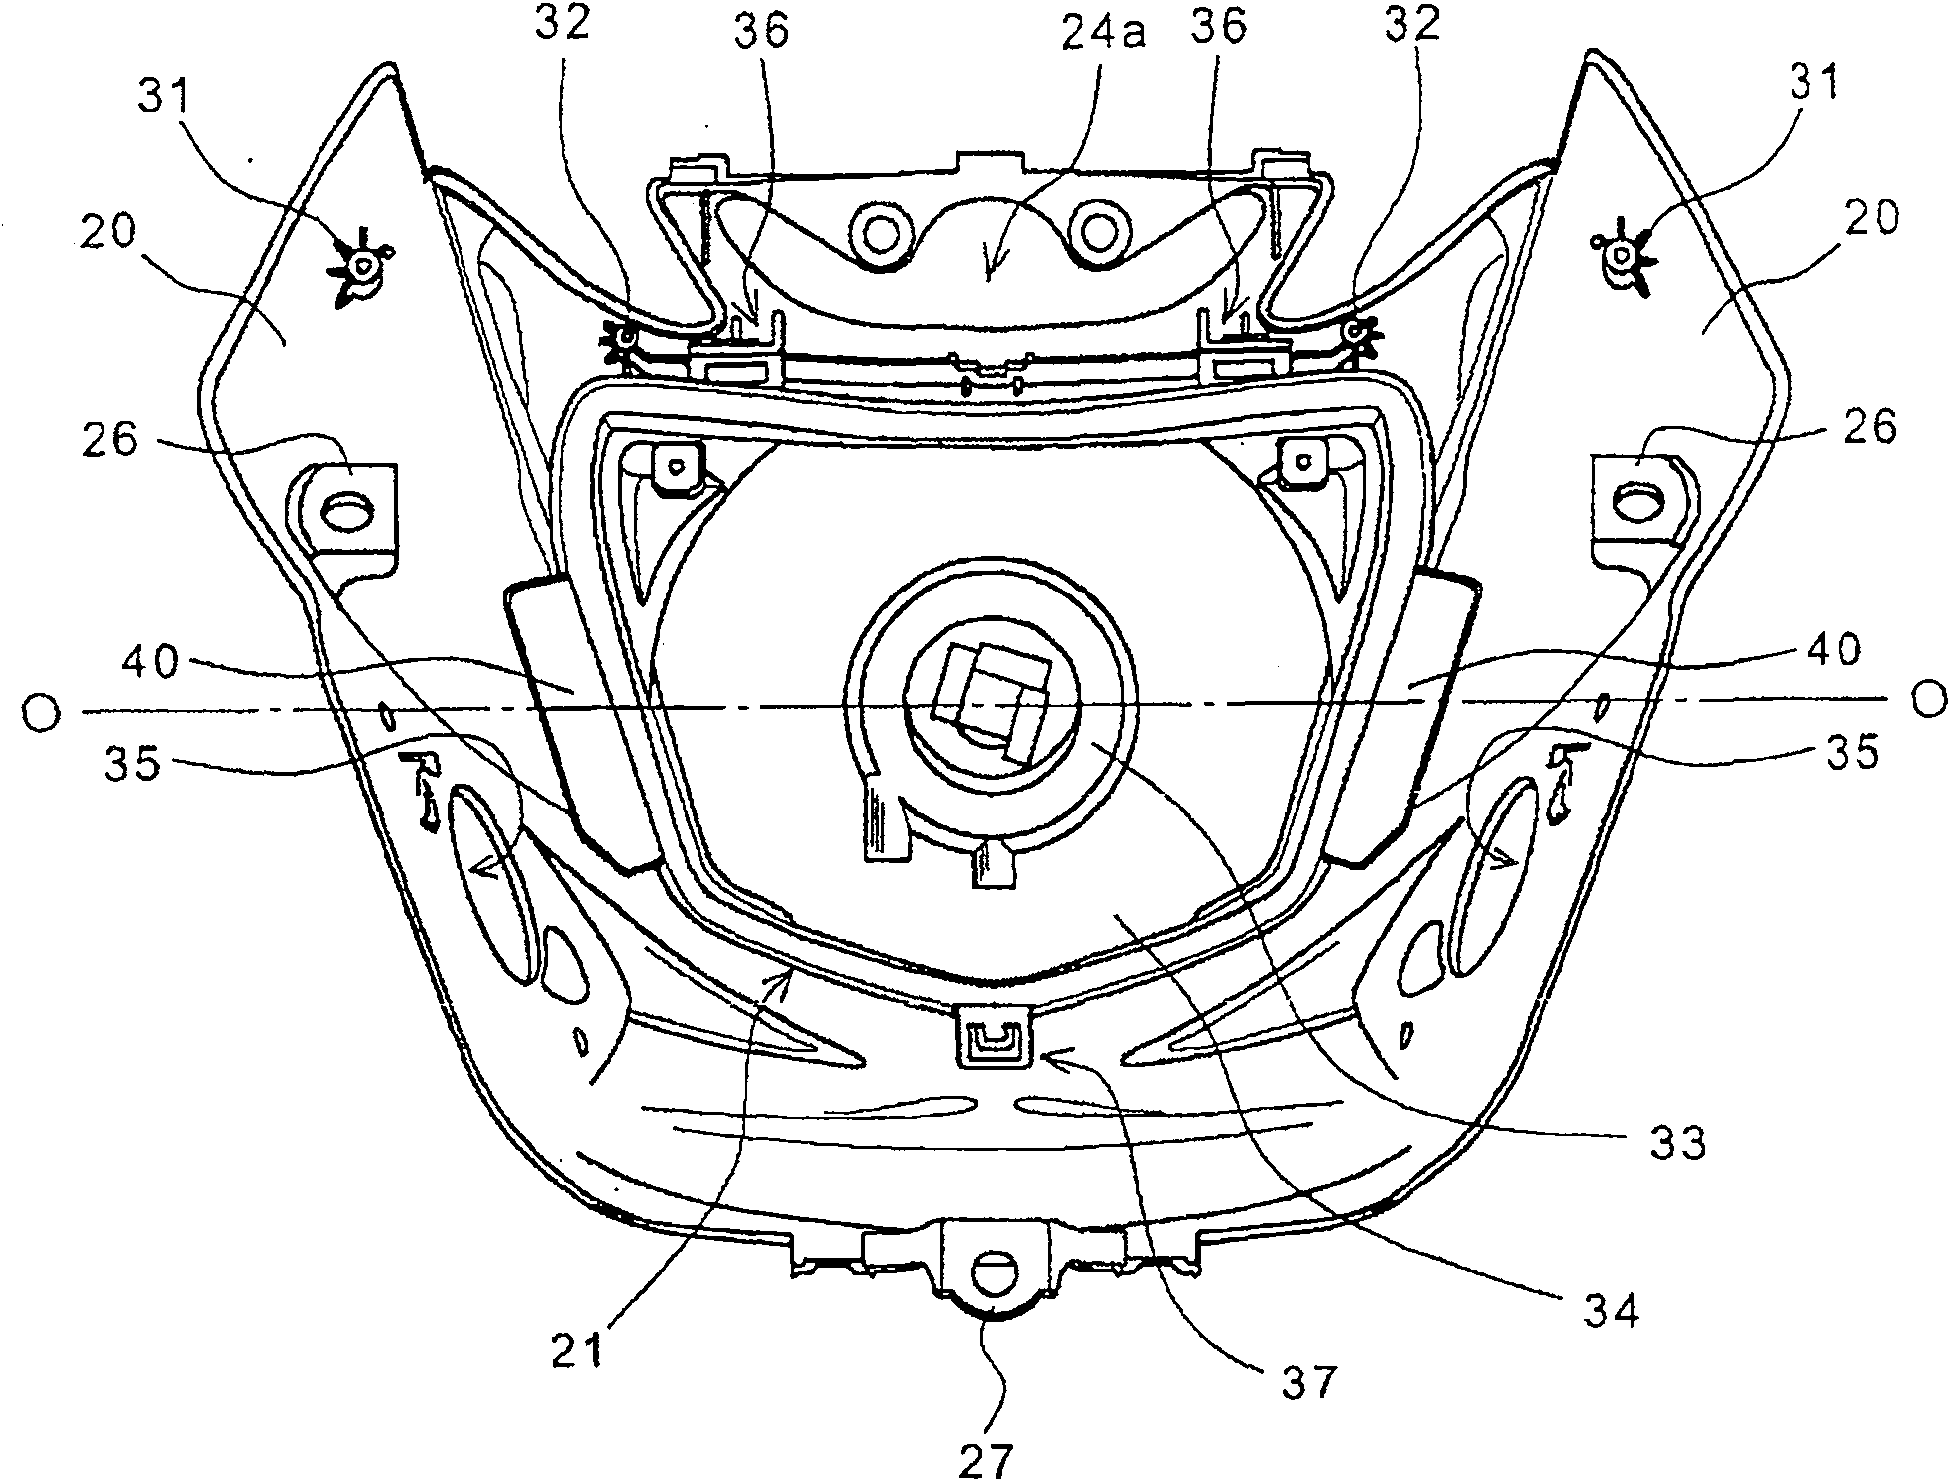 Head lamp device for motor bicycle